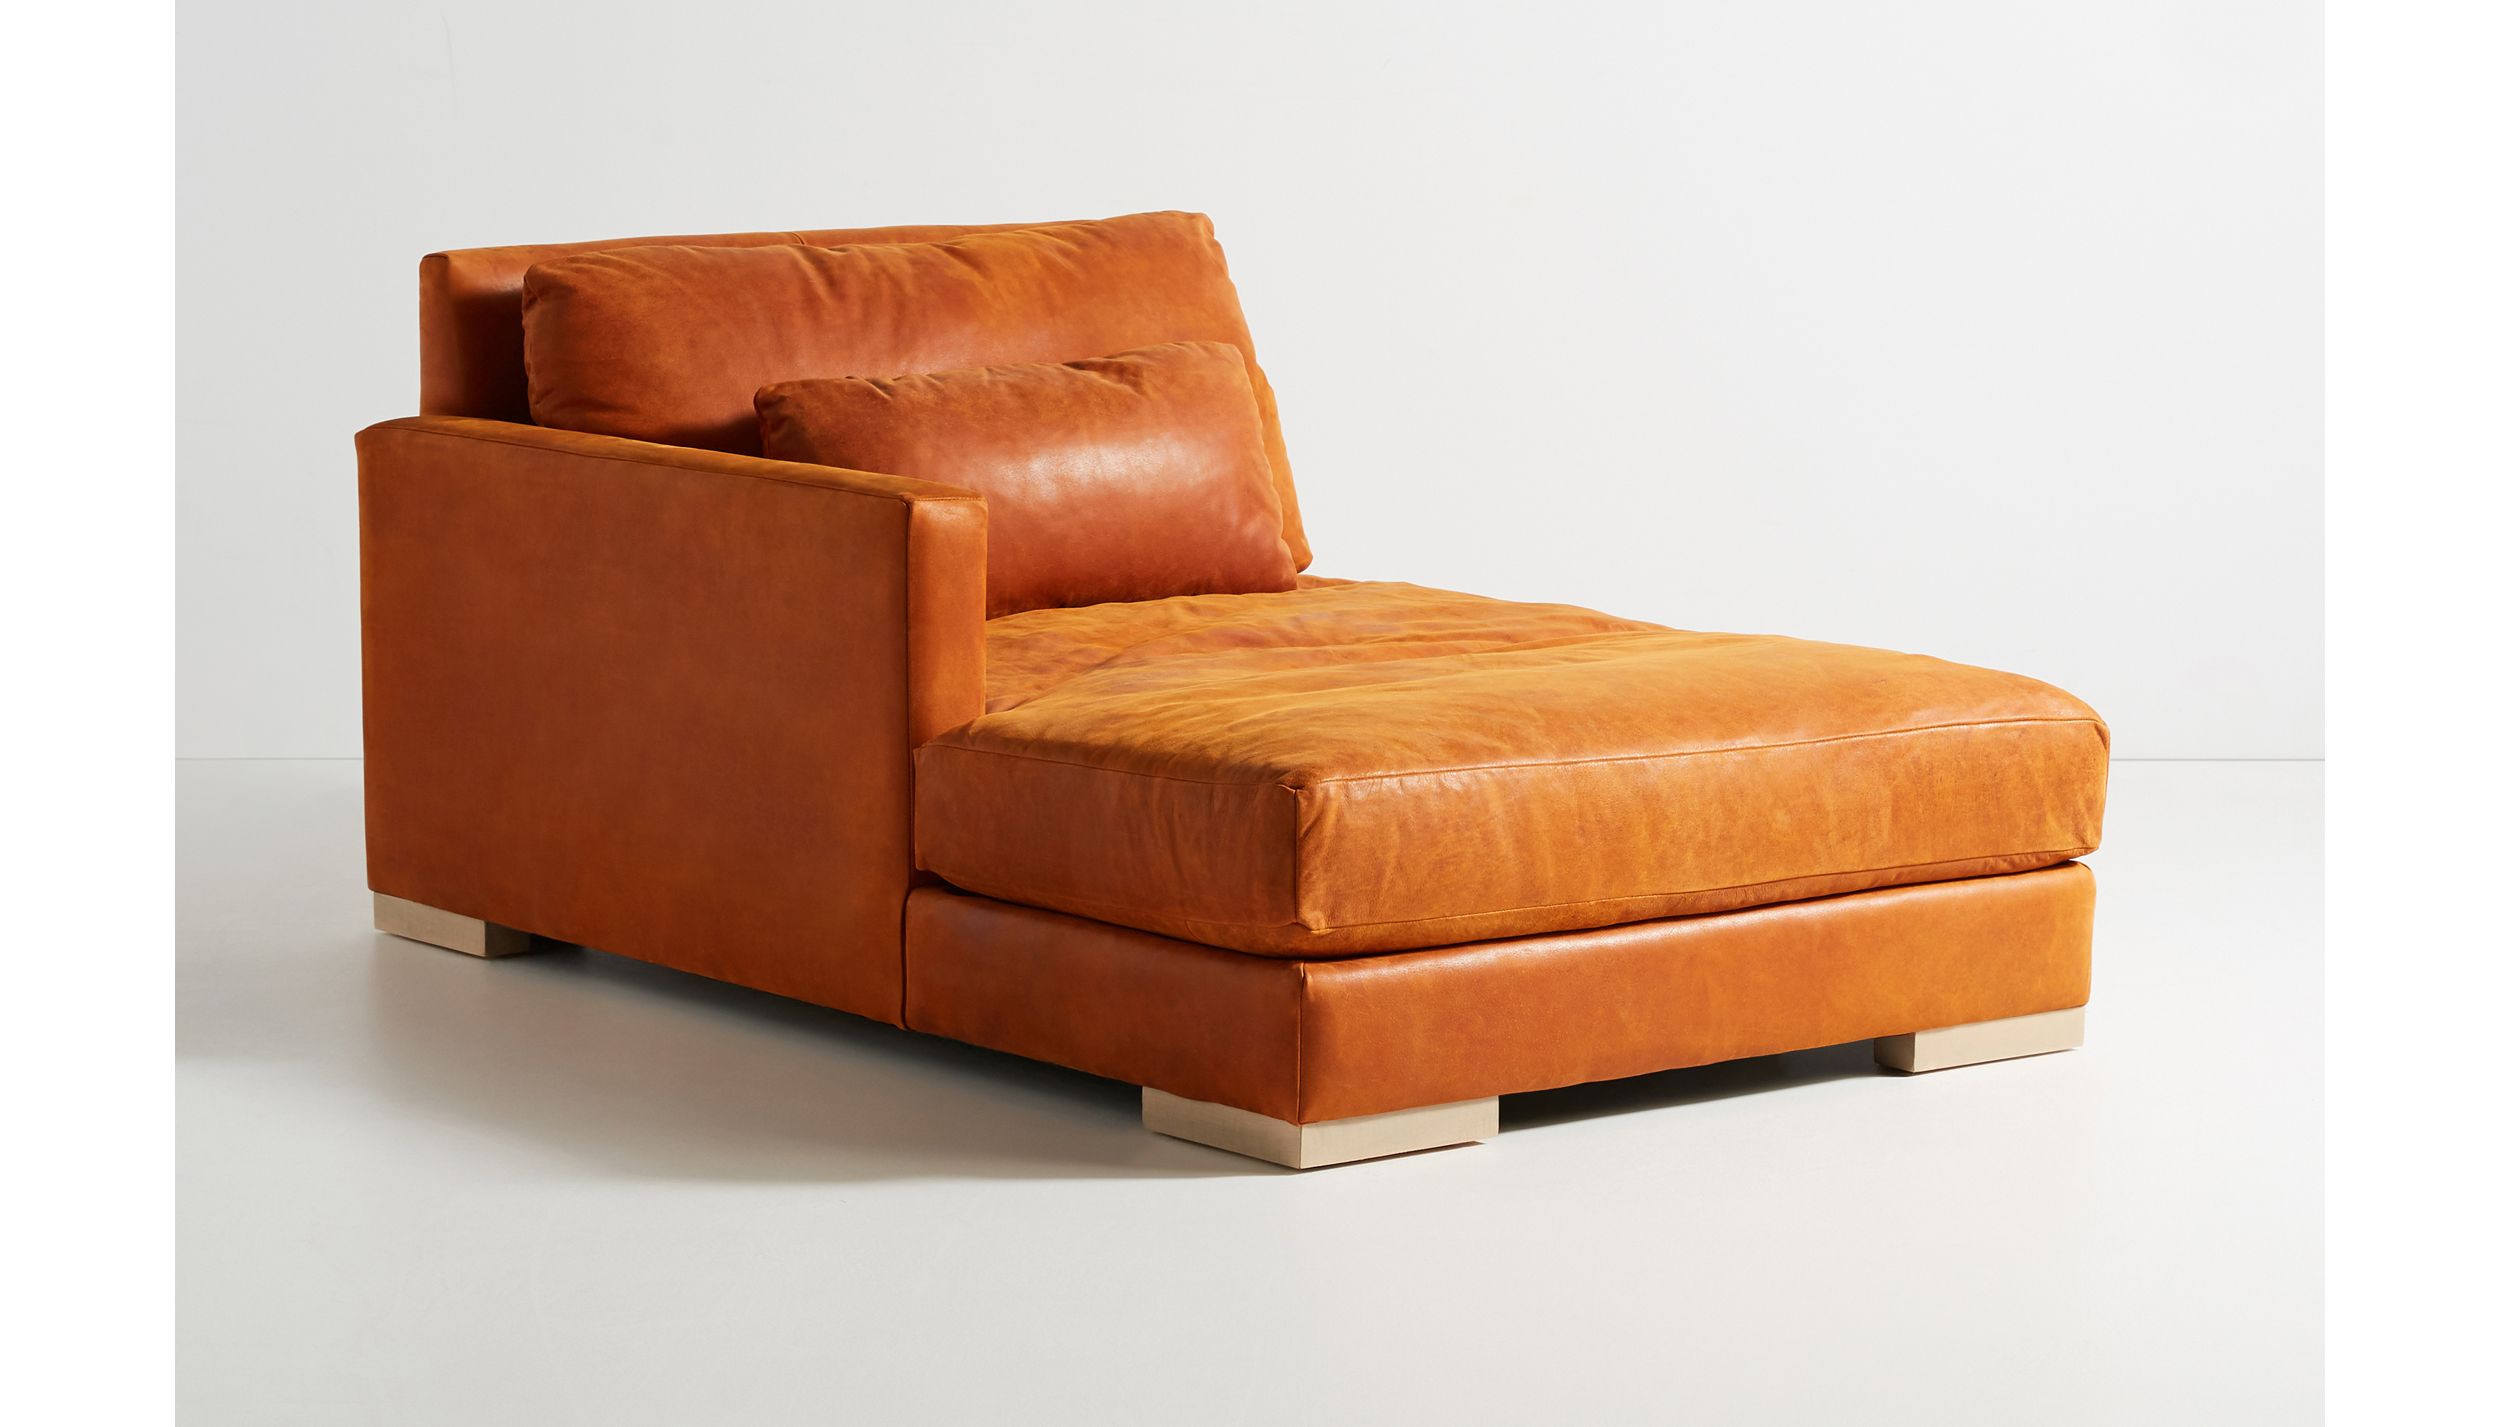 Relaxed Sunday Modular Leather Chaise, Brown Leather Chaise